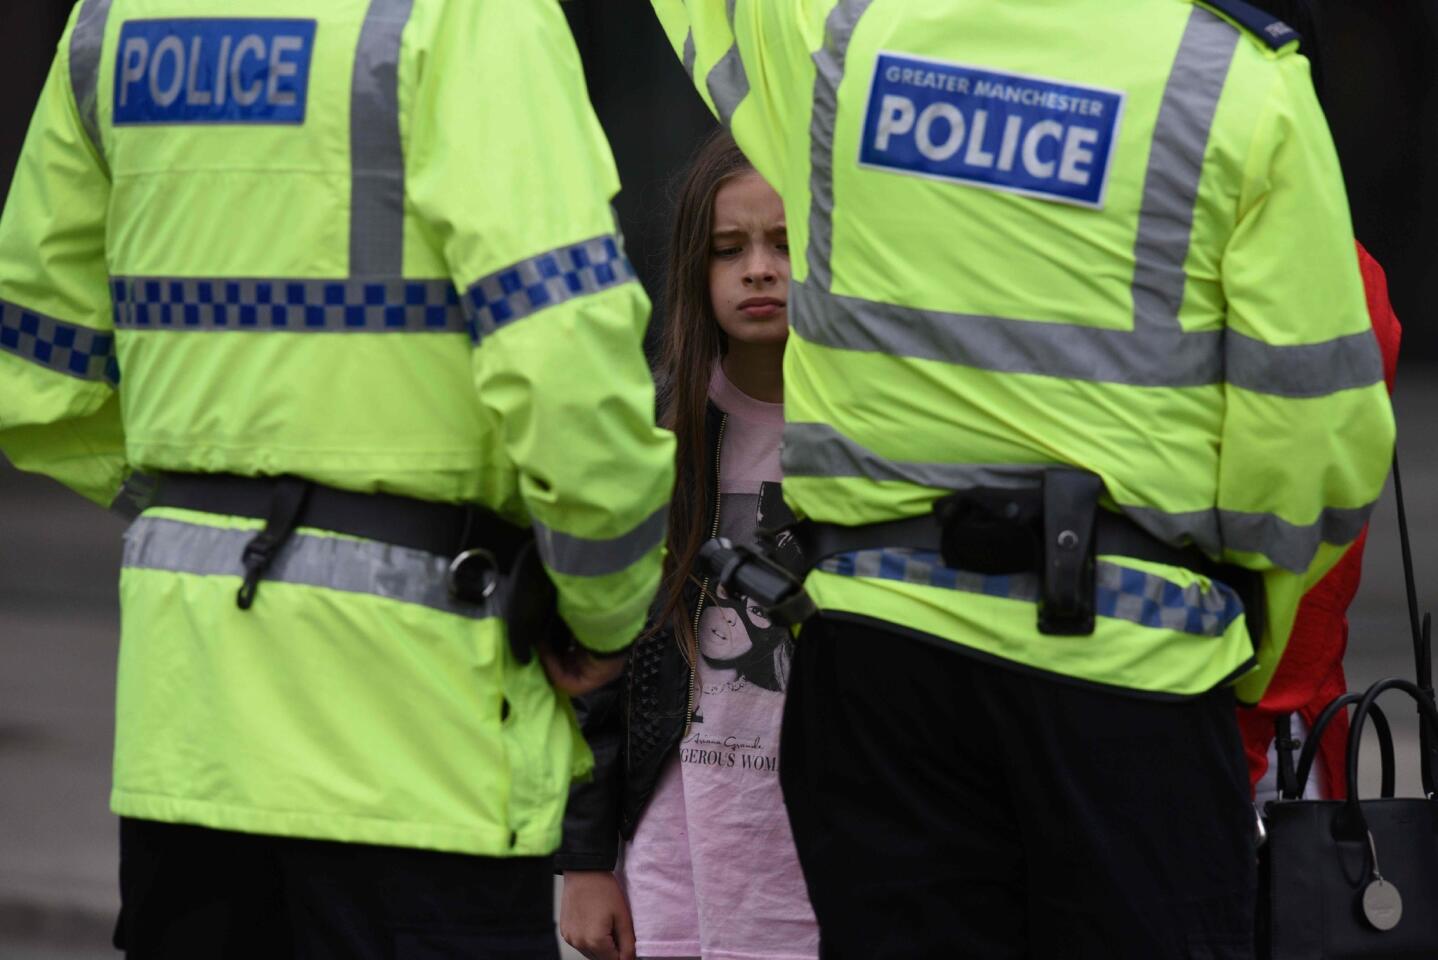 A woman and a young girl, who is wearing a T-shirt of singer Ariana Grande, talk to police May 23, 2017, near Manchester Arena in Manchester, England the day after an explosion at a concert by Grande killed 22 people.